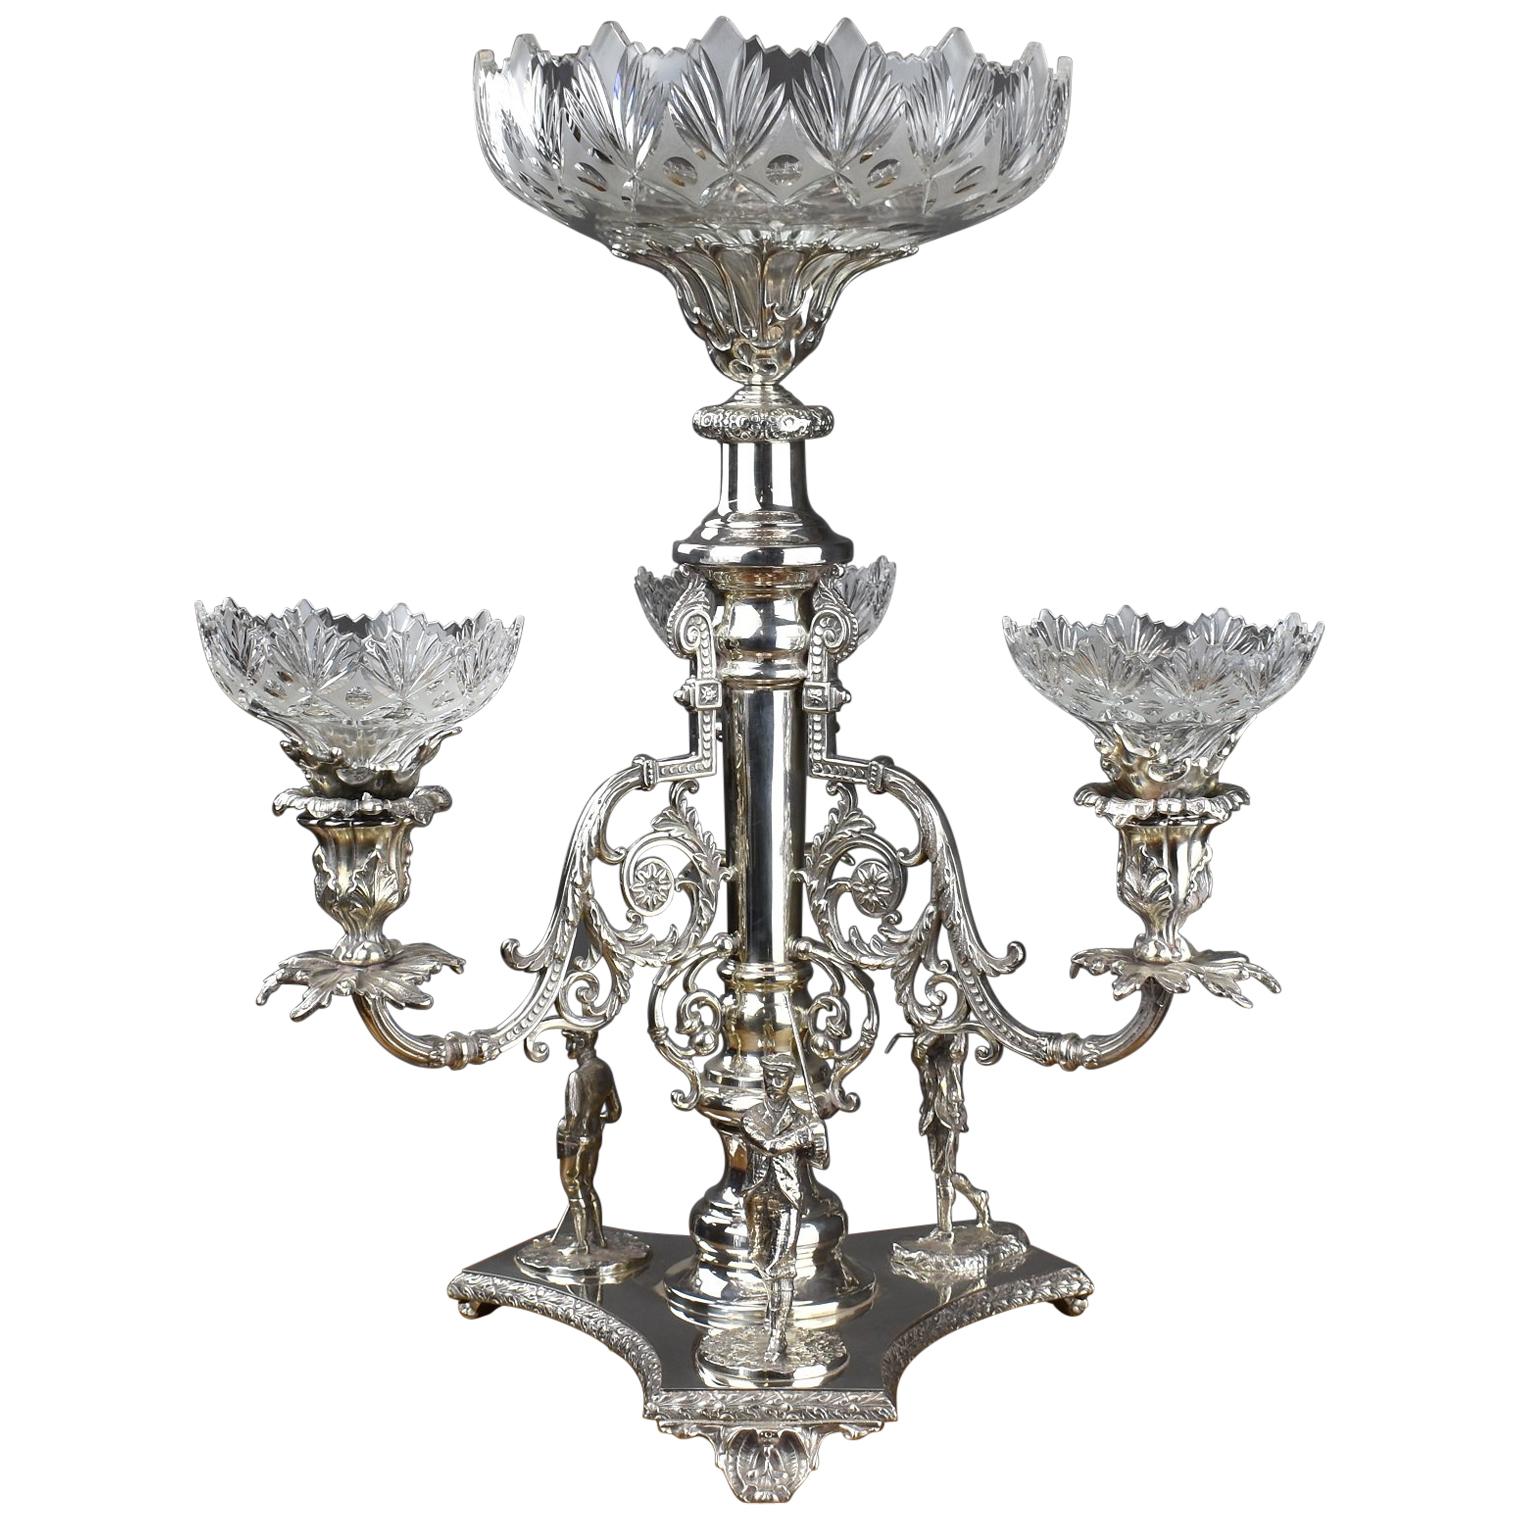 19th Century Silver Plate Golfing Candelabra Trophy / Centre Piece For Sale